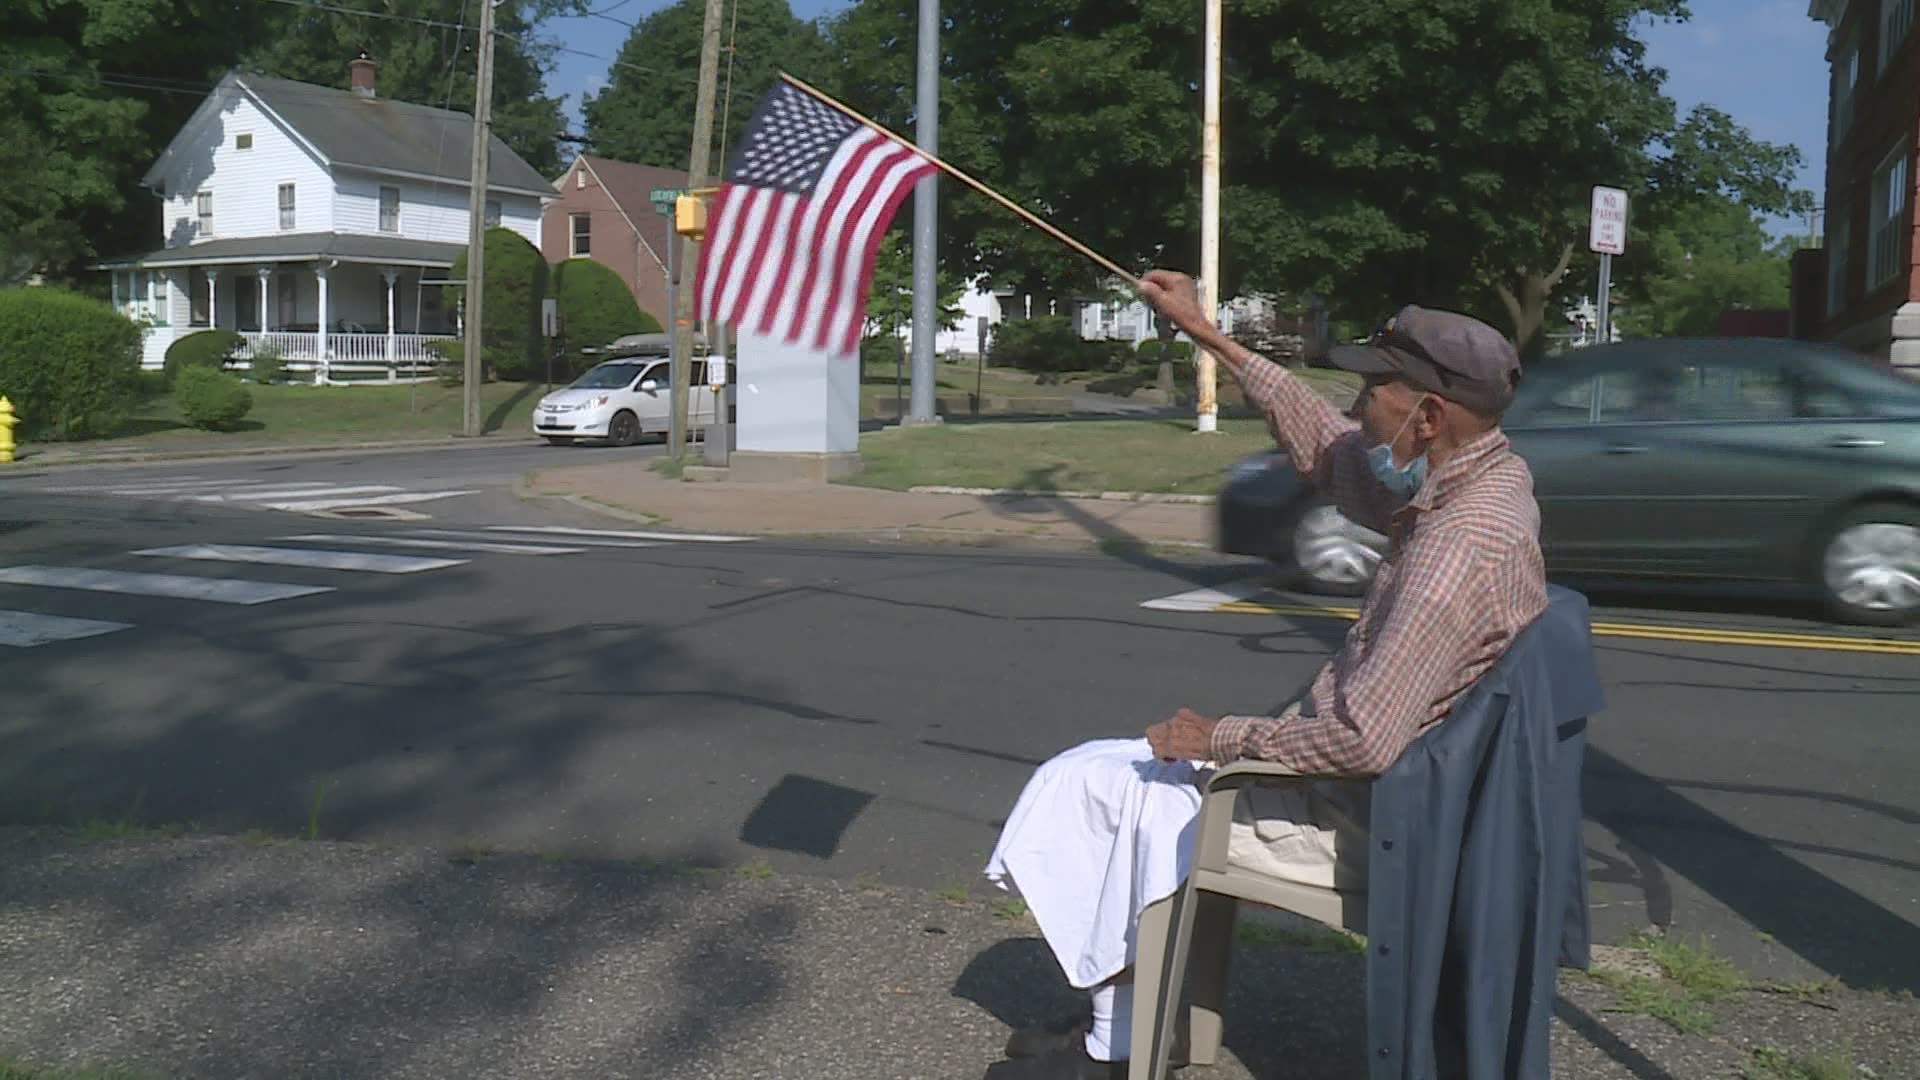 Every morning, World War II veteran Mastrocola grabs a lawn chair and an American flag and takes a seat on the sidewalk. It's part of his final mission in life.